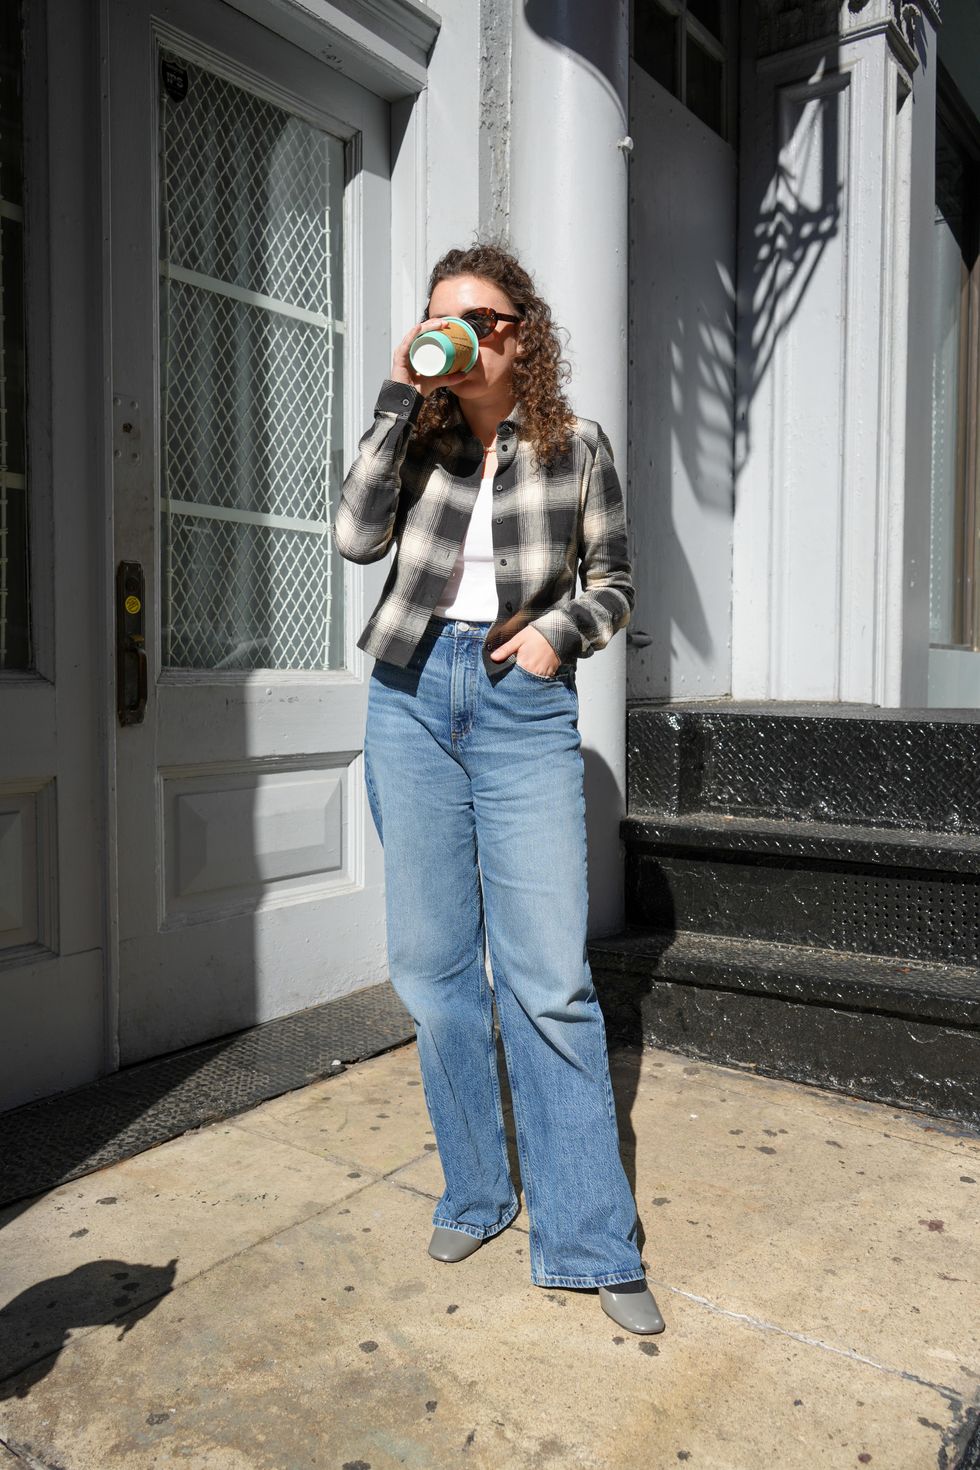 How Coveteur Editors Styled Themselves Through The Last of The Transitional Weather